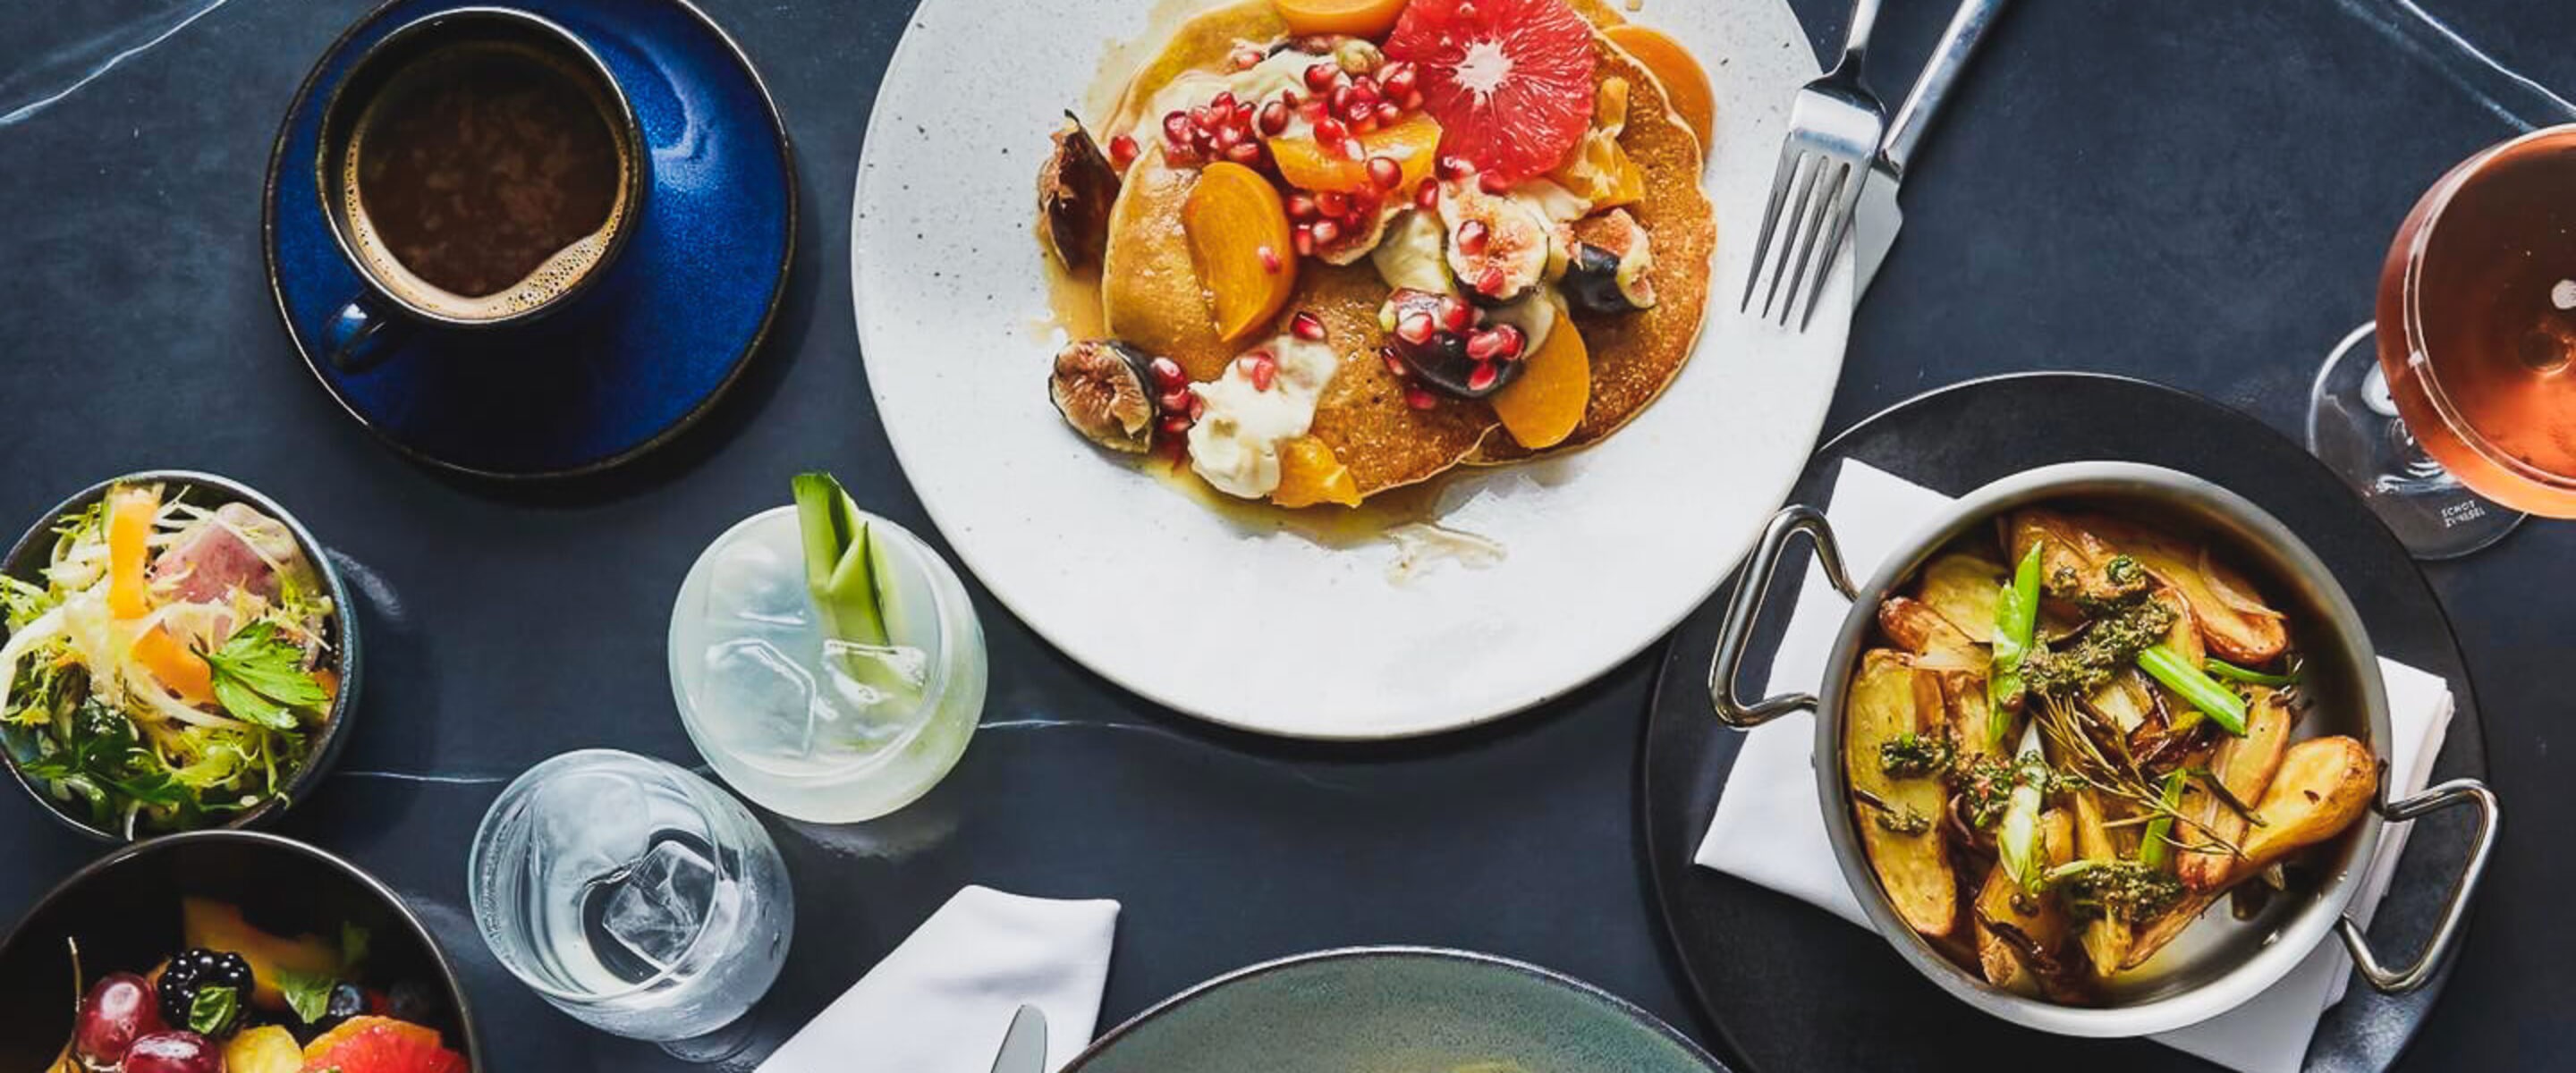 The 12 Best Vegan Brunches in the California Bay Area